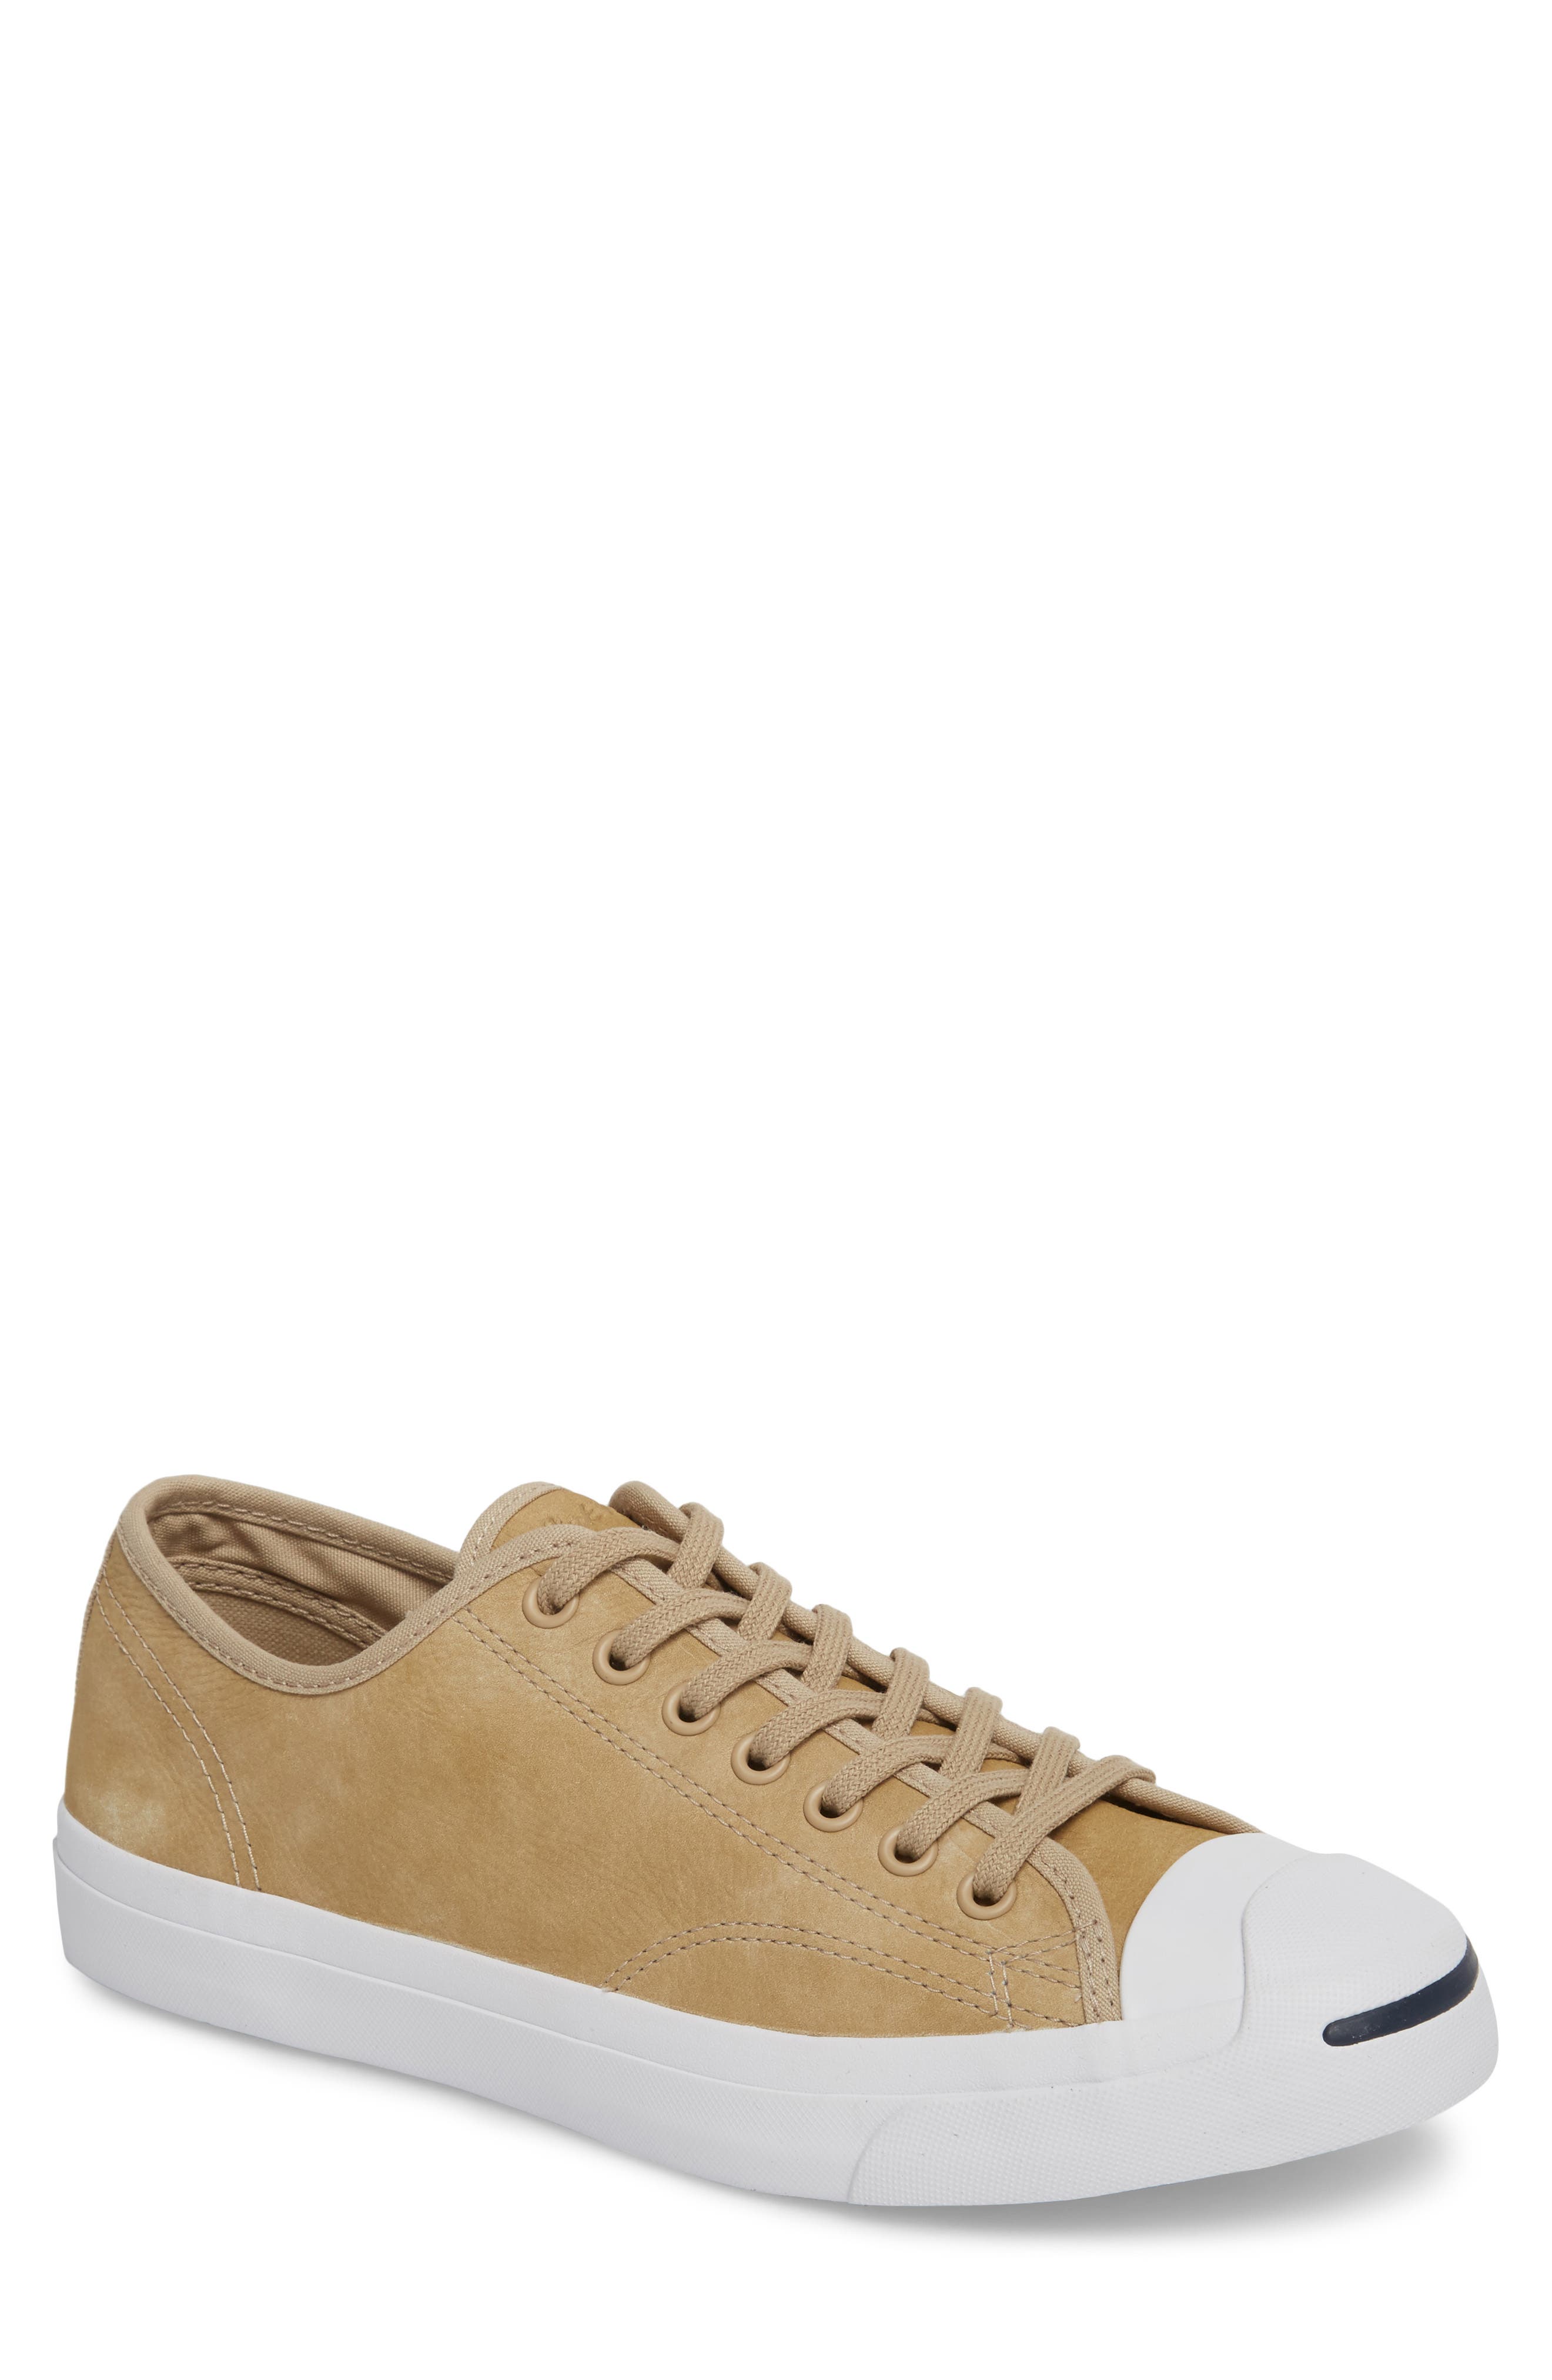 converse jack purcell beige